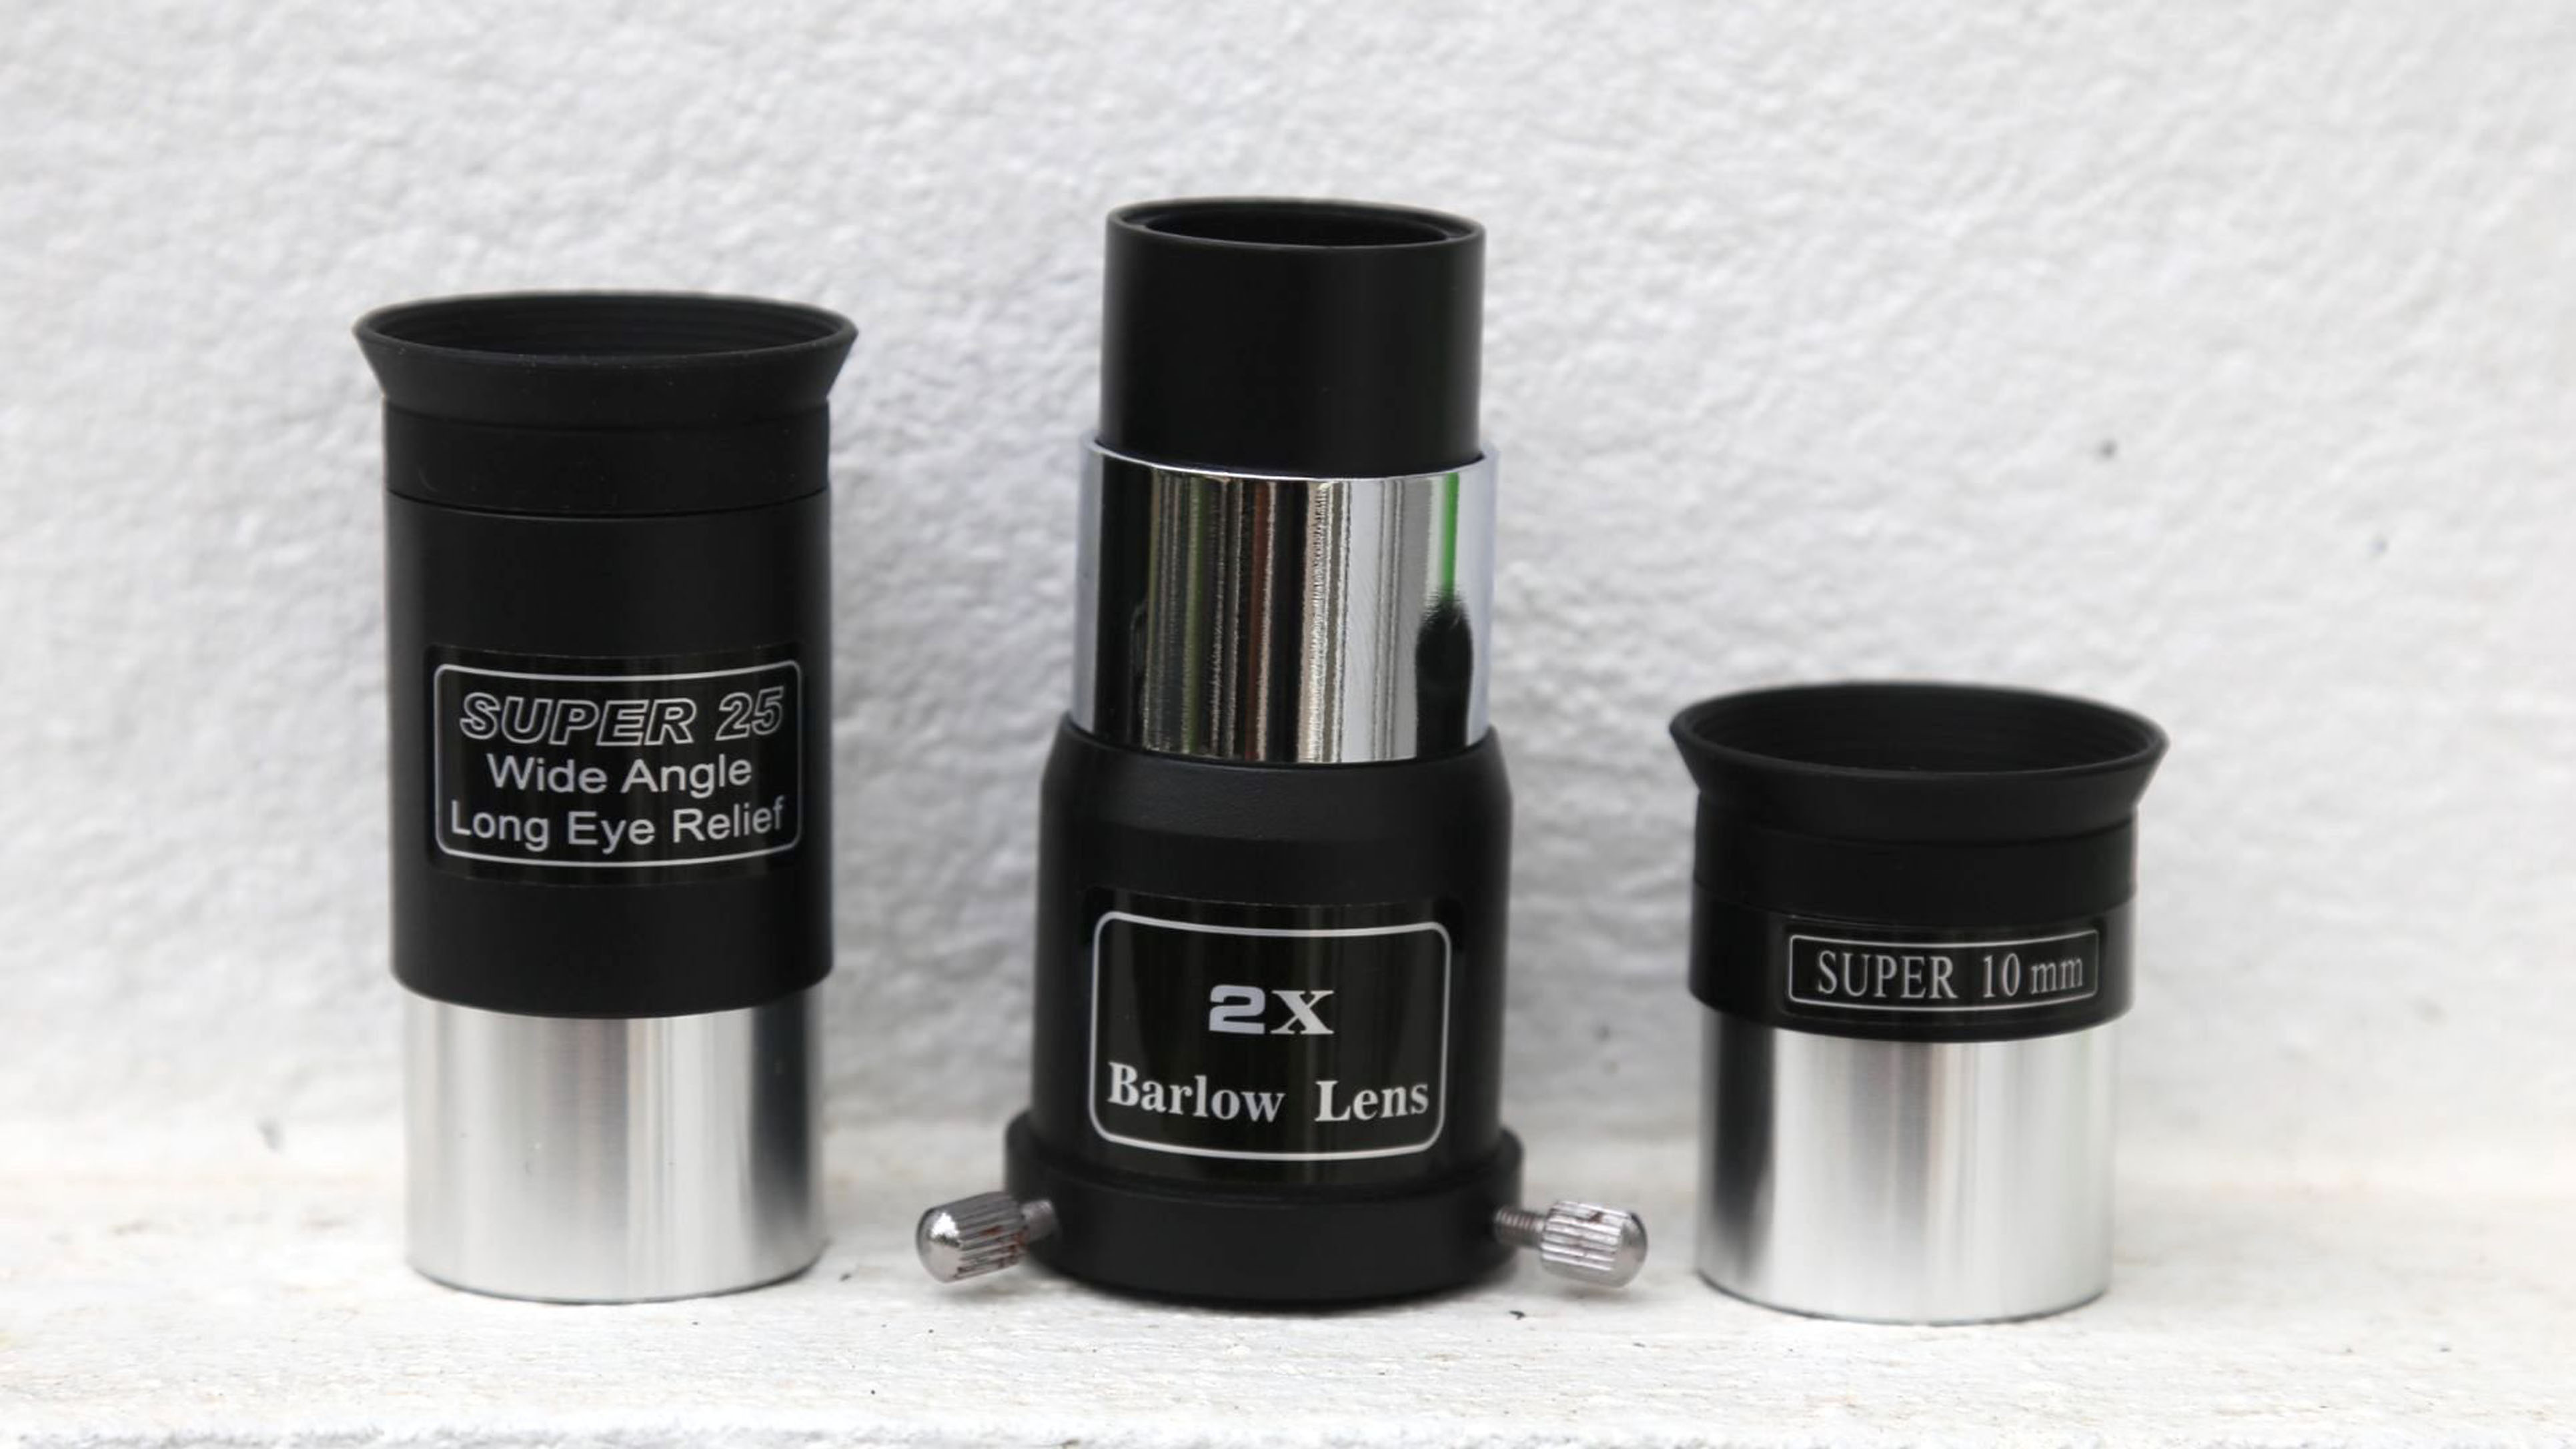 Sky-watcher explorer 130 eyepieces and barlow lens against wall